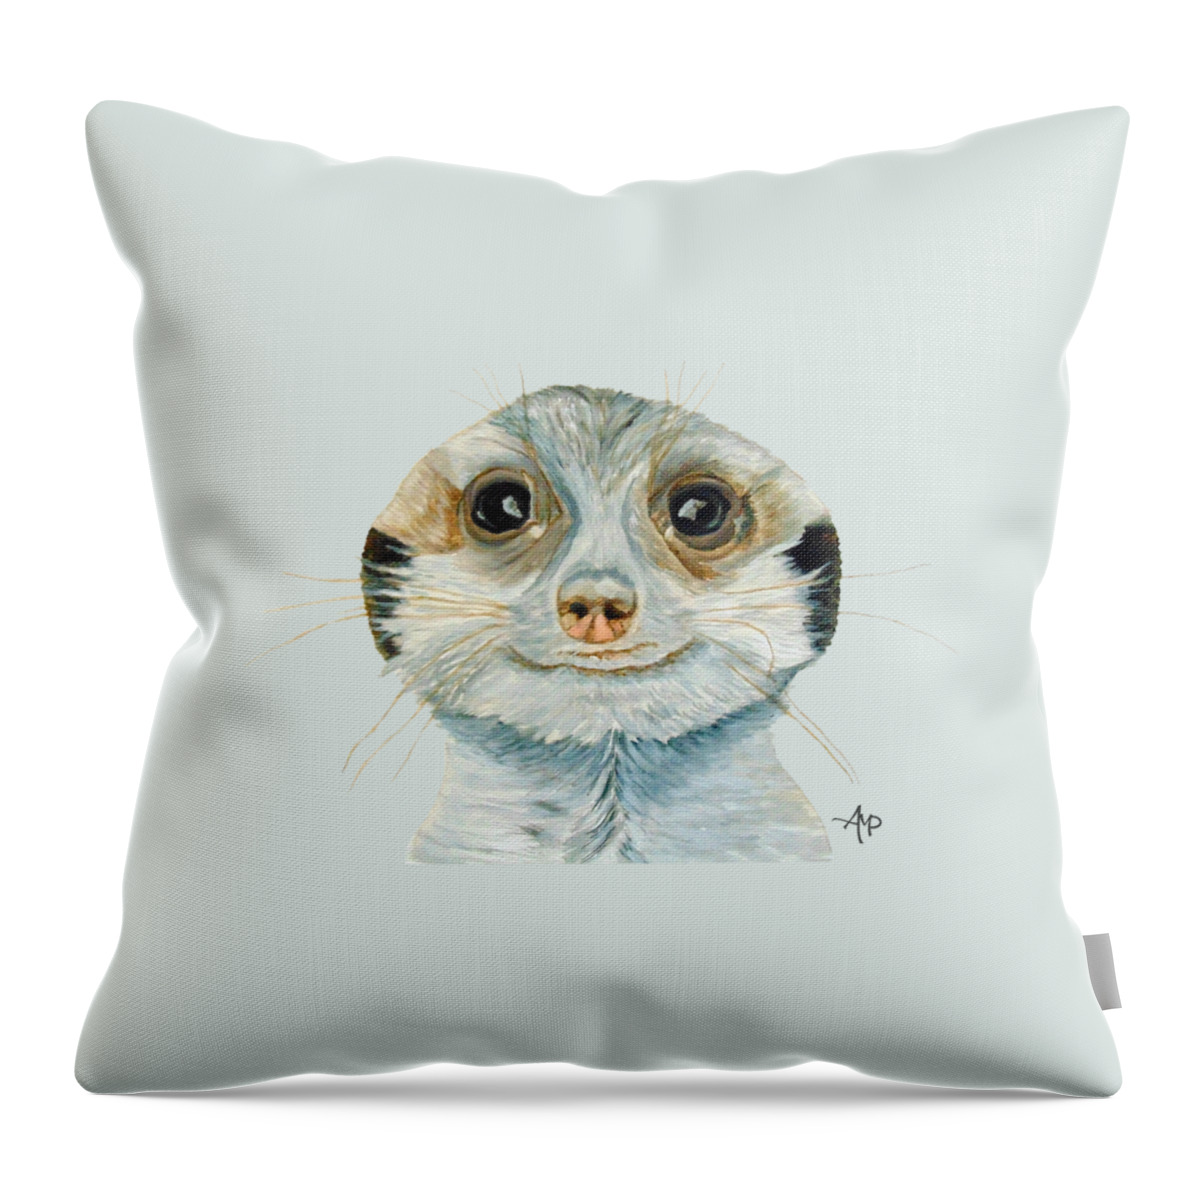 Suricate Throw Pillow featuring the painting Meerkat by Angeles M Pomata